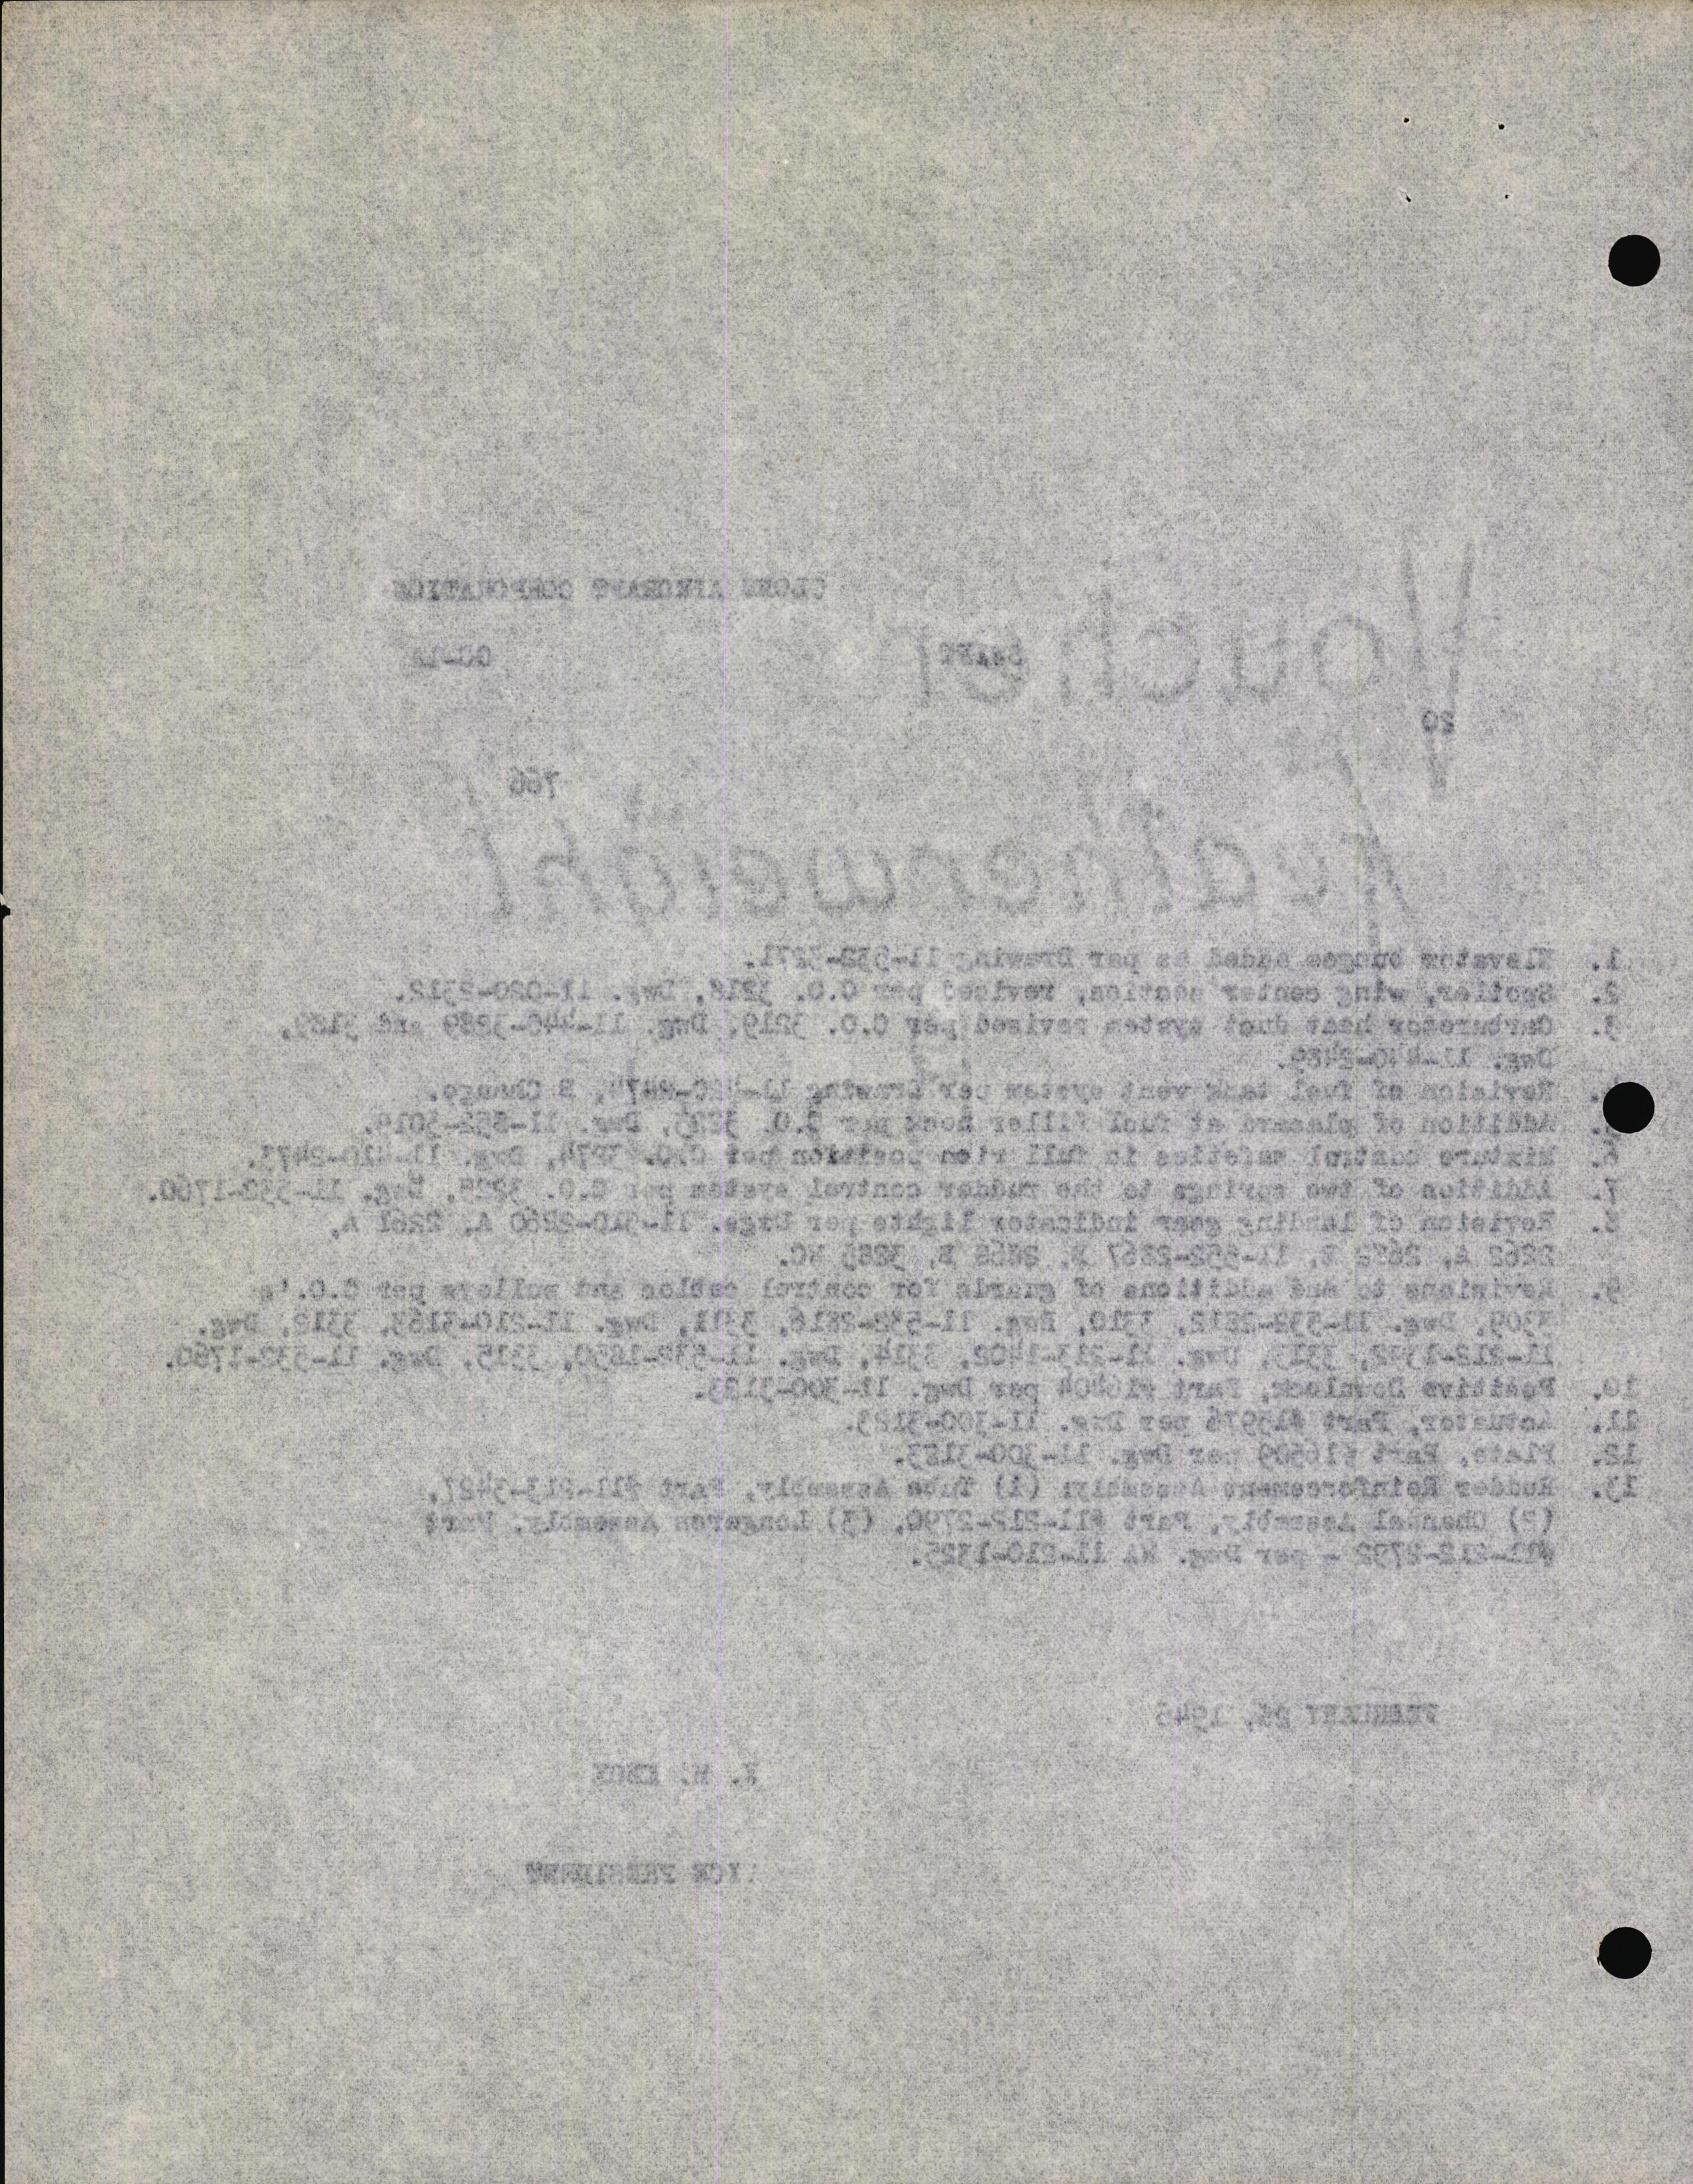 Sample page 6 from AirCorps Library document: Technical Information for Serial Number 20